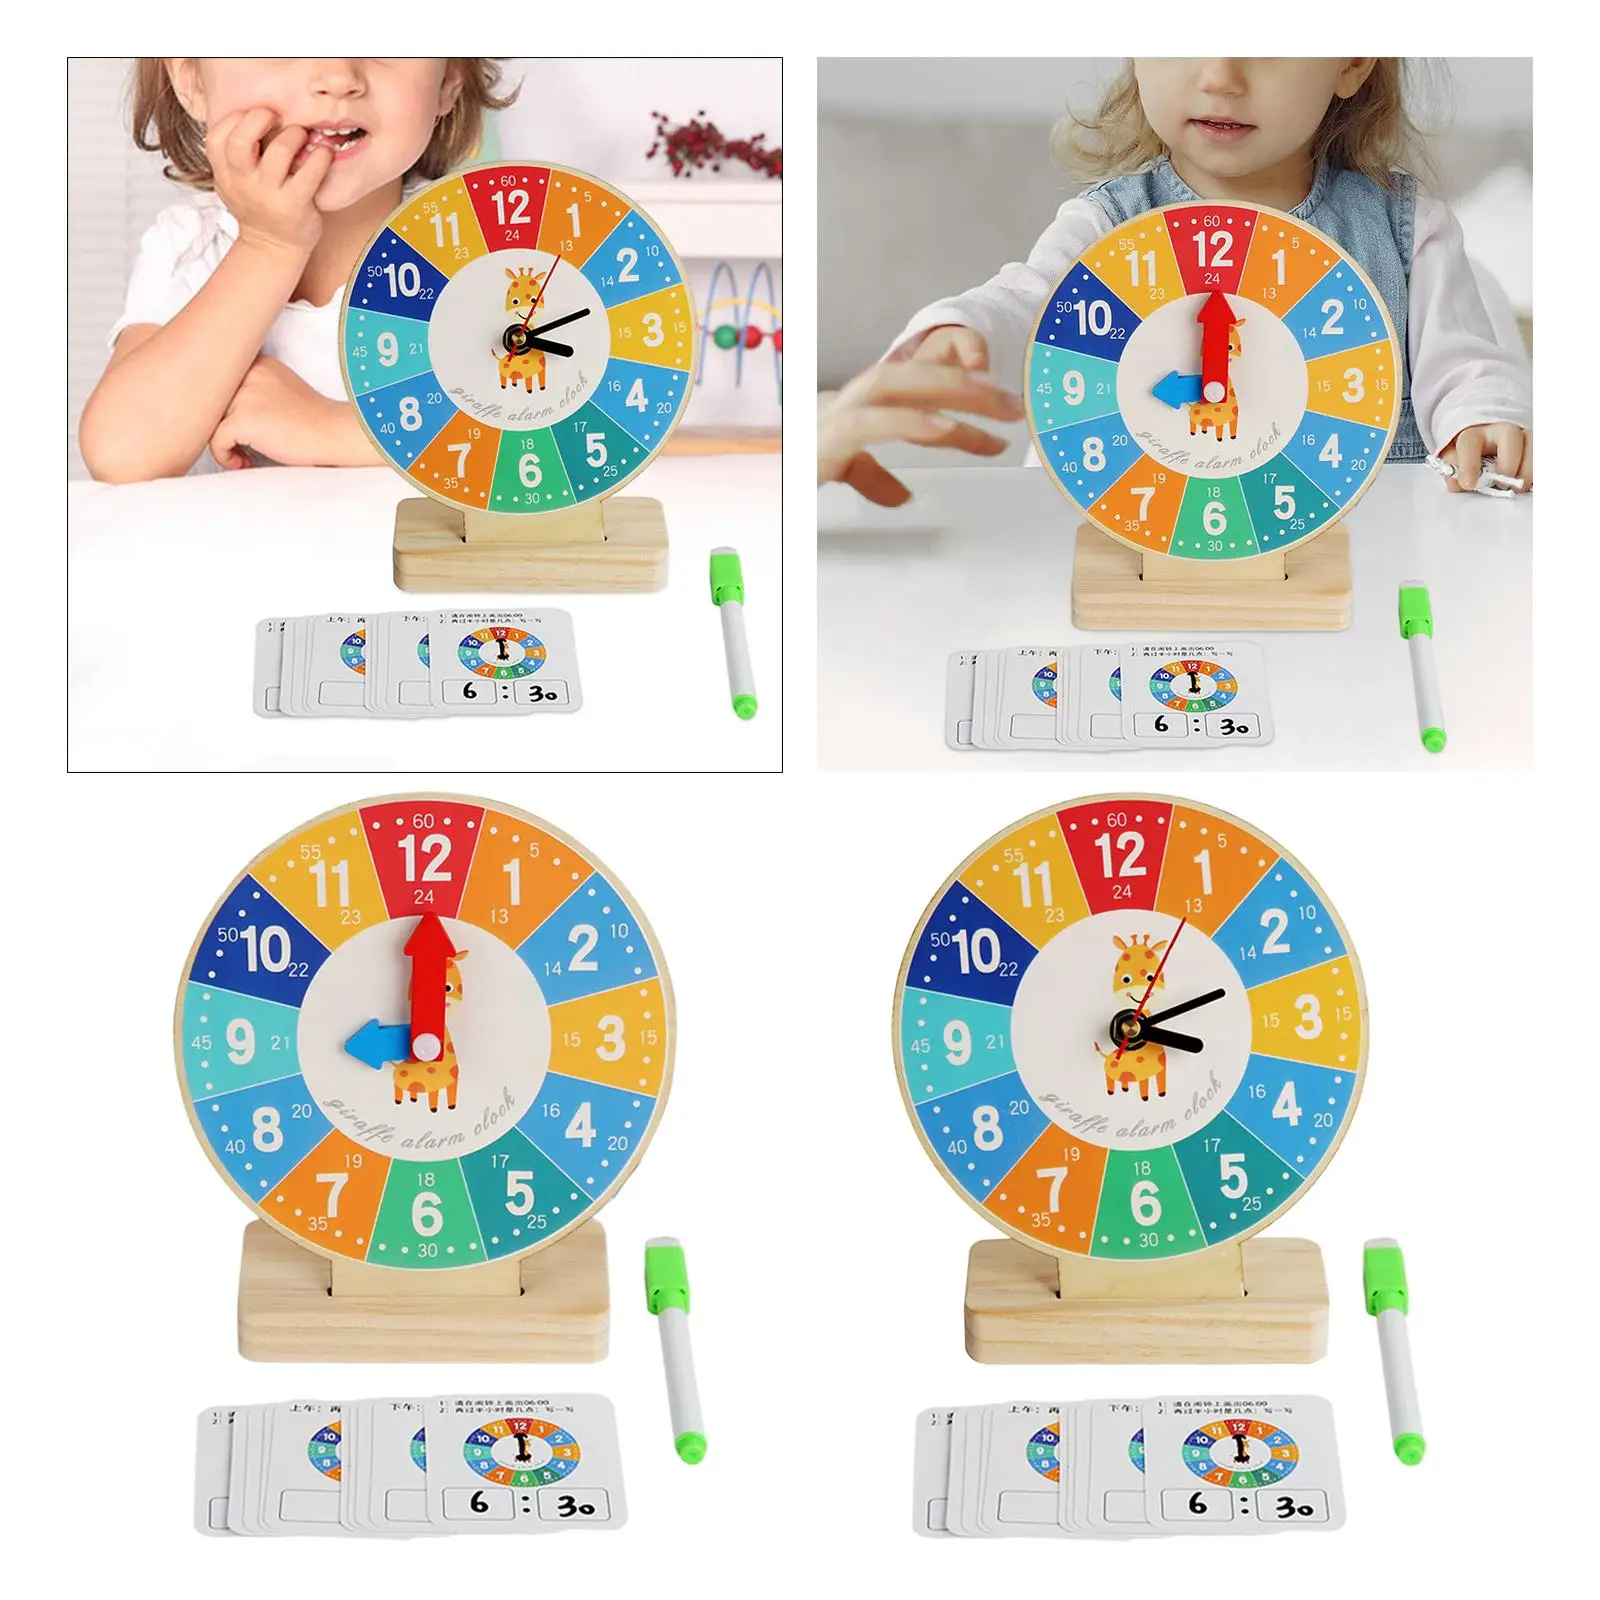 Kids Teaching Clocks Time Activity Montessori Toy for Home School Supplies Learning Activities Kindergartner for 3 4 5 Year Old